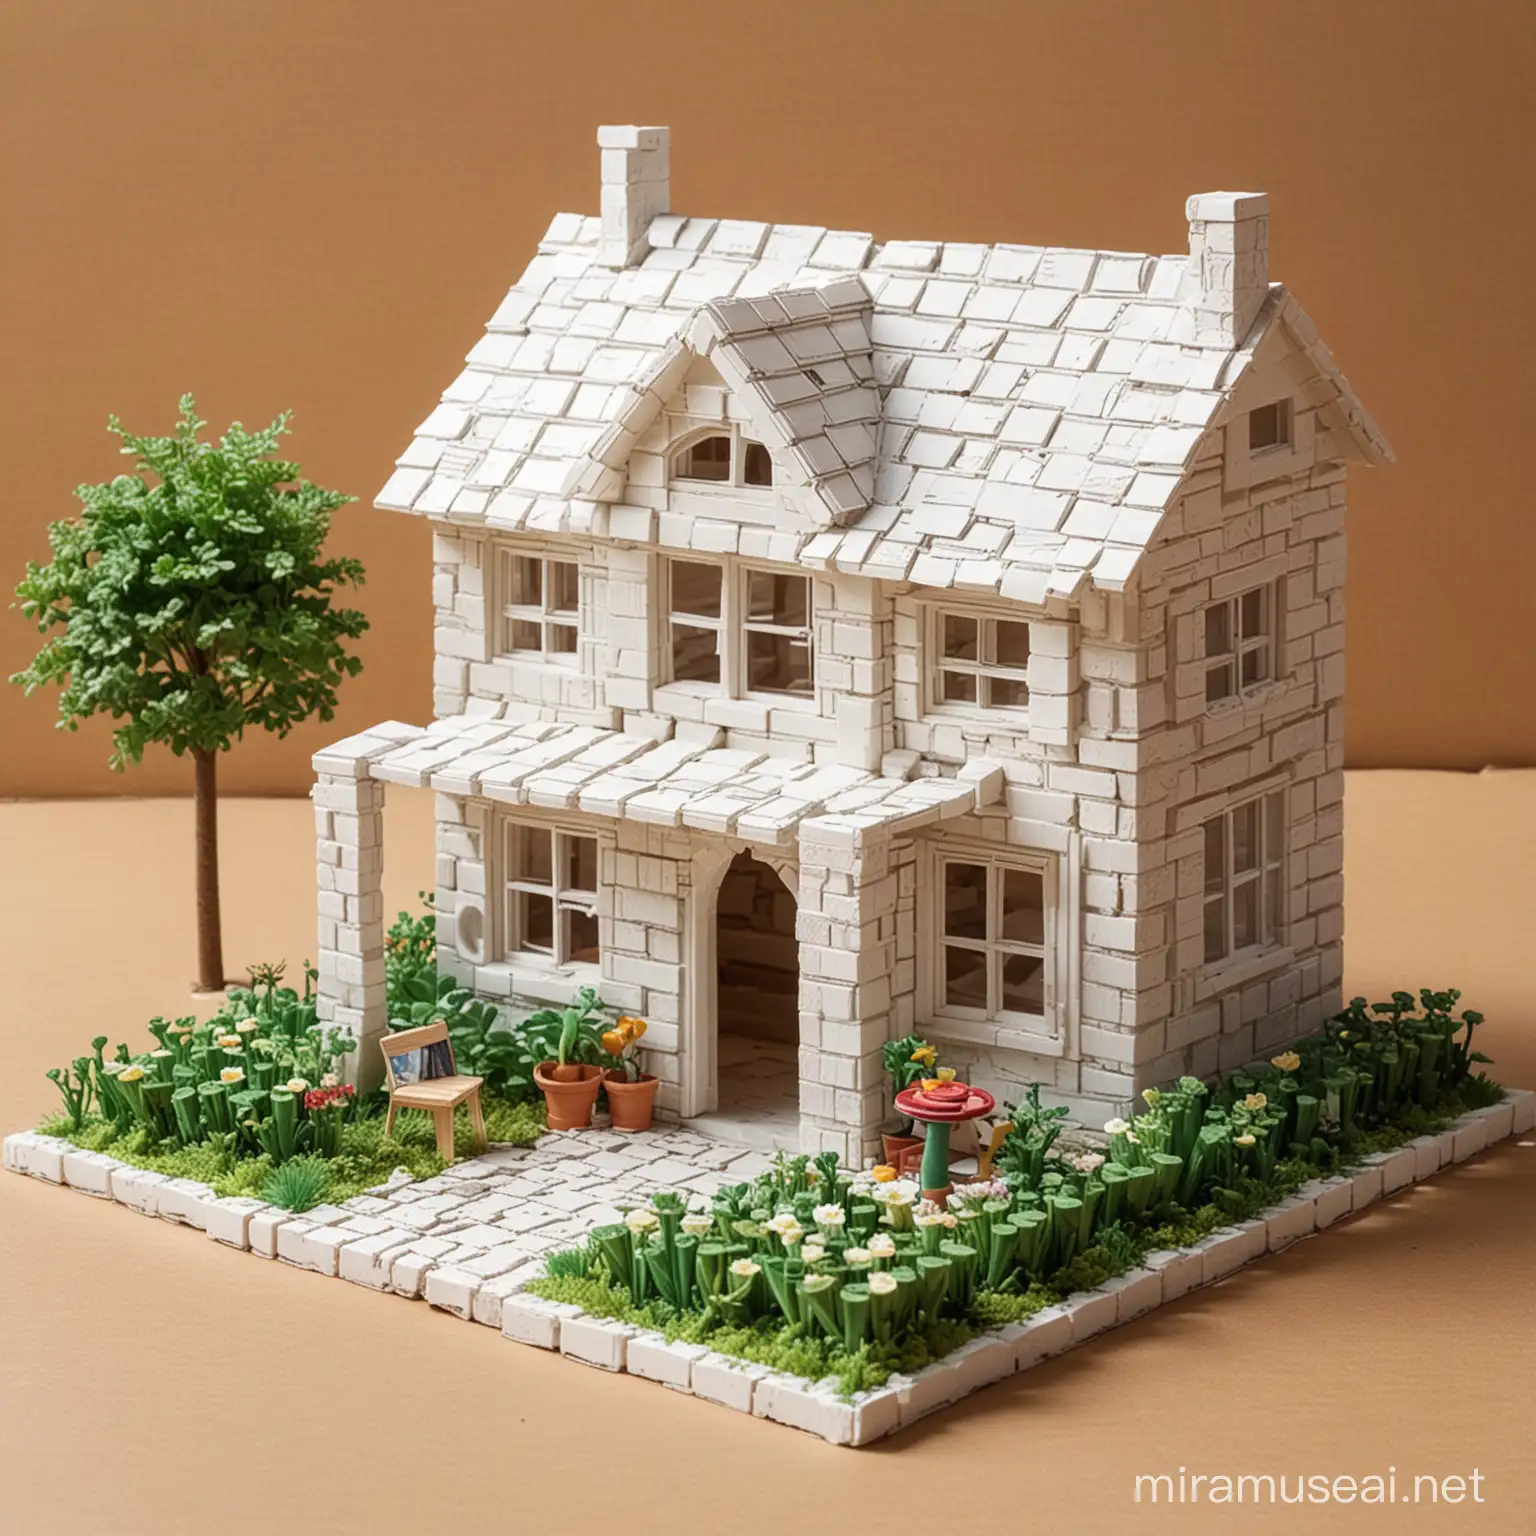 Sketch an ideation of toy design kit contains mini white bricks and Glue to make an house type structure out of that bricks, add some more elements like glue bottle, window and door cardboard frames make garden in outer area and generate image in front view 